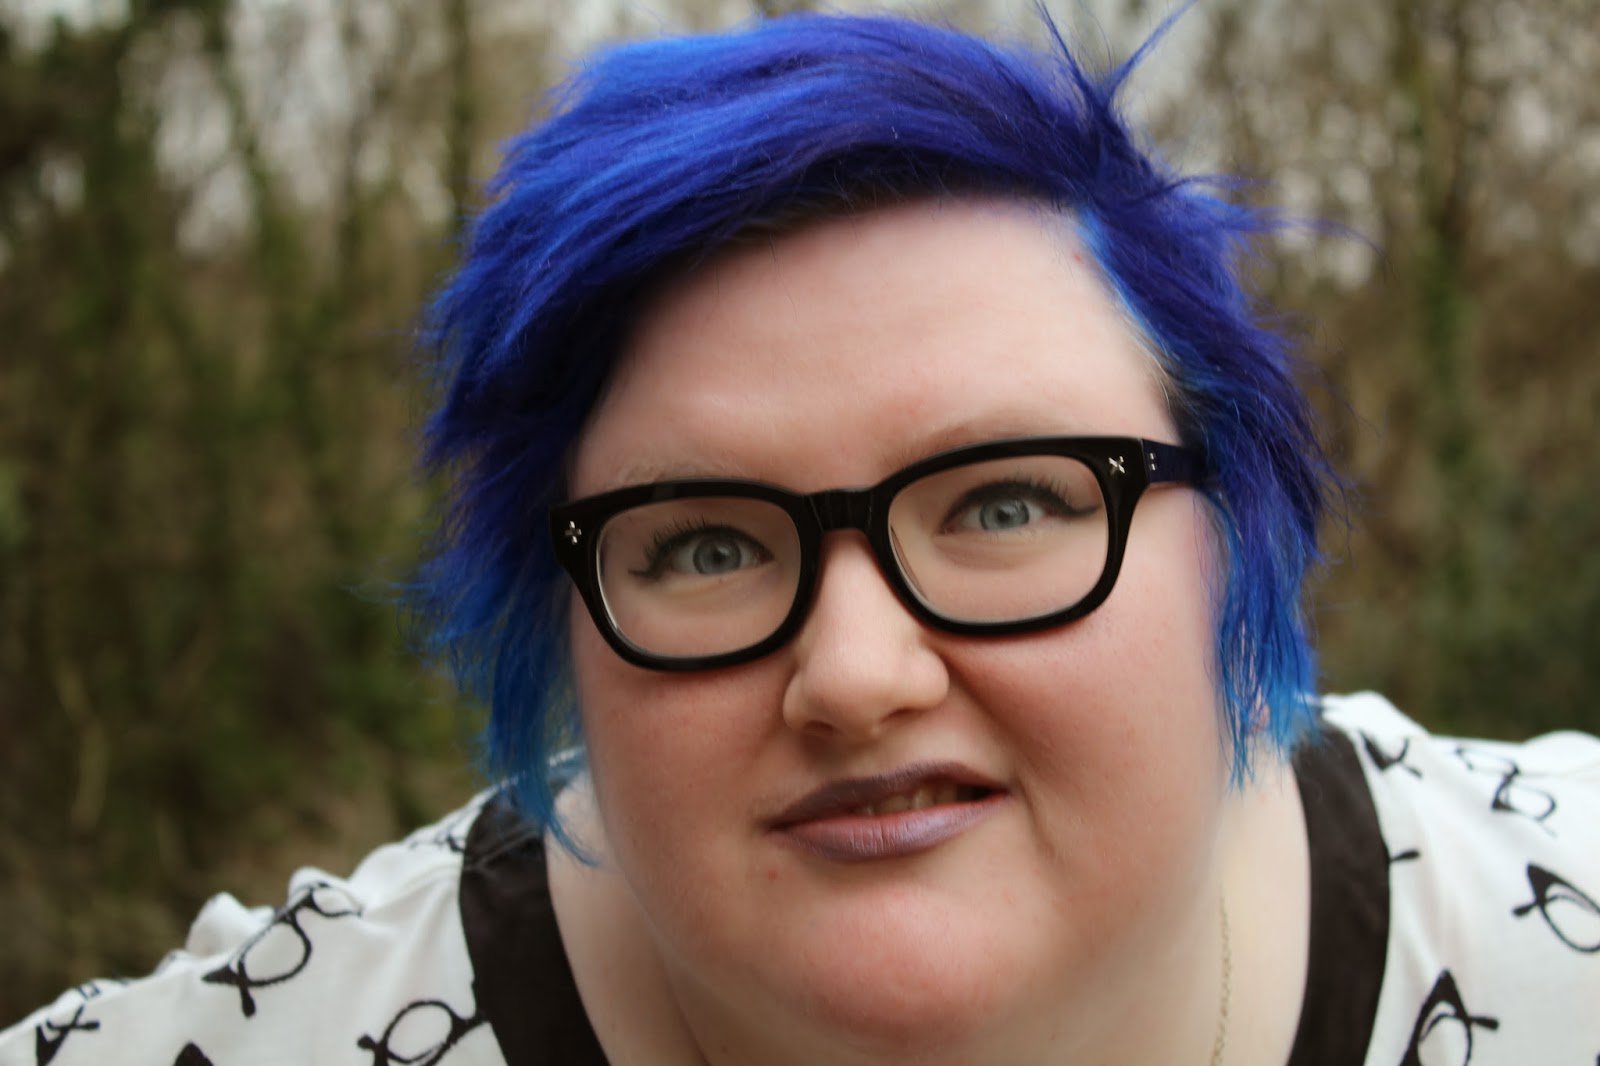 5. "Breaking Gender Norms: The Rise of Pointy Blue Hair in Feminist Communities" by journalist Sarah Jones - wide 8